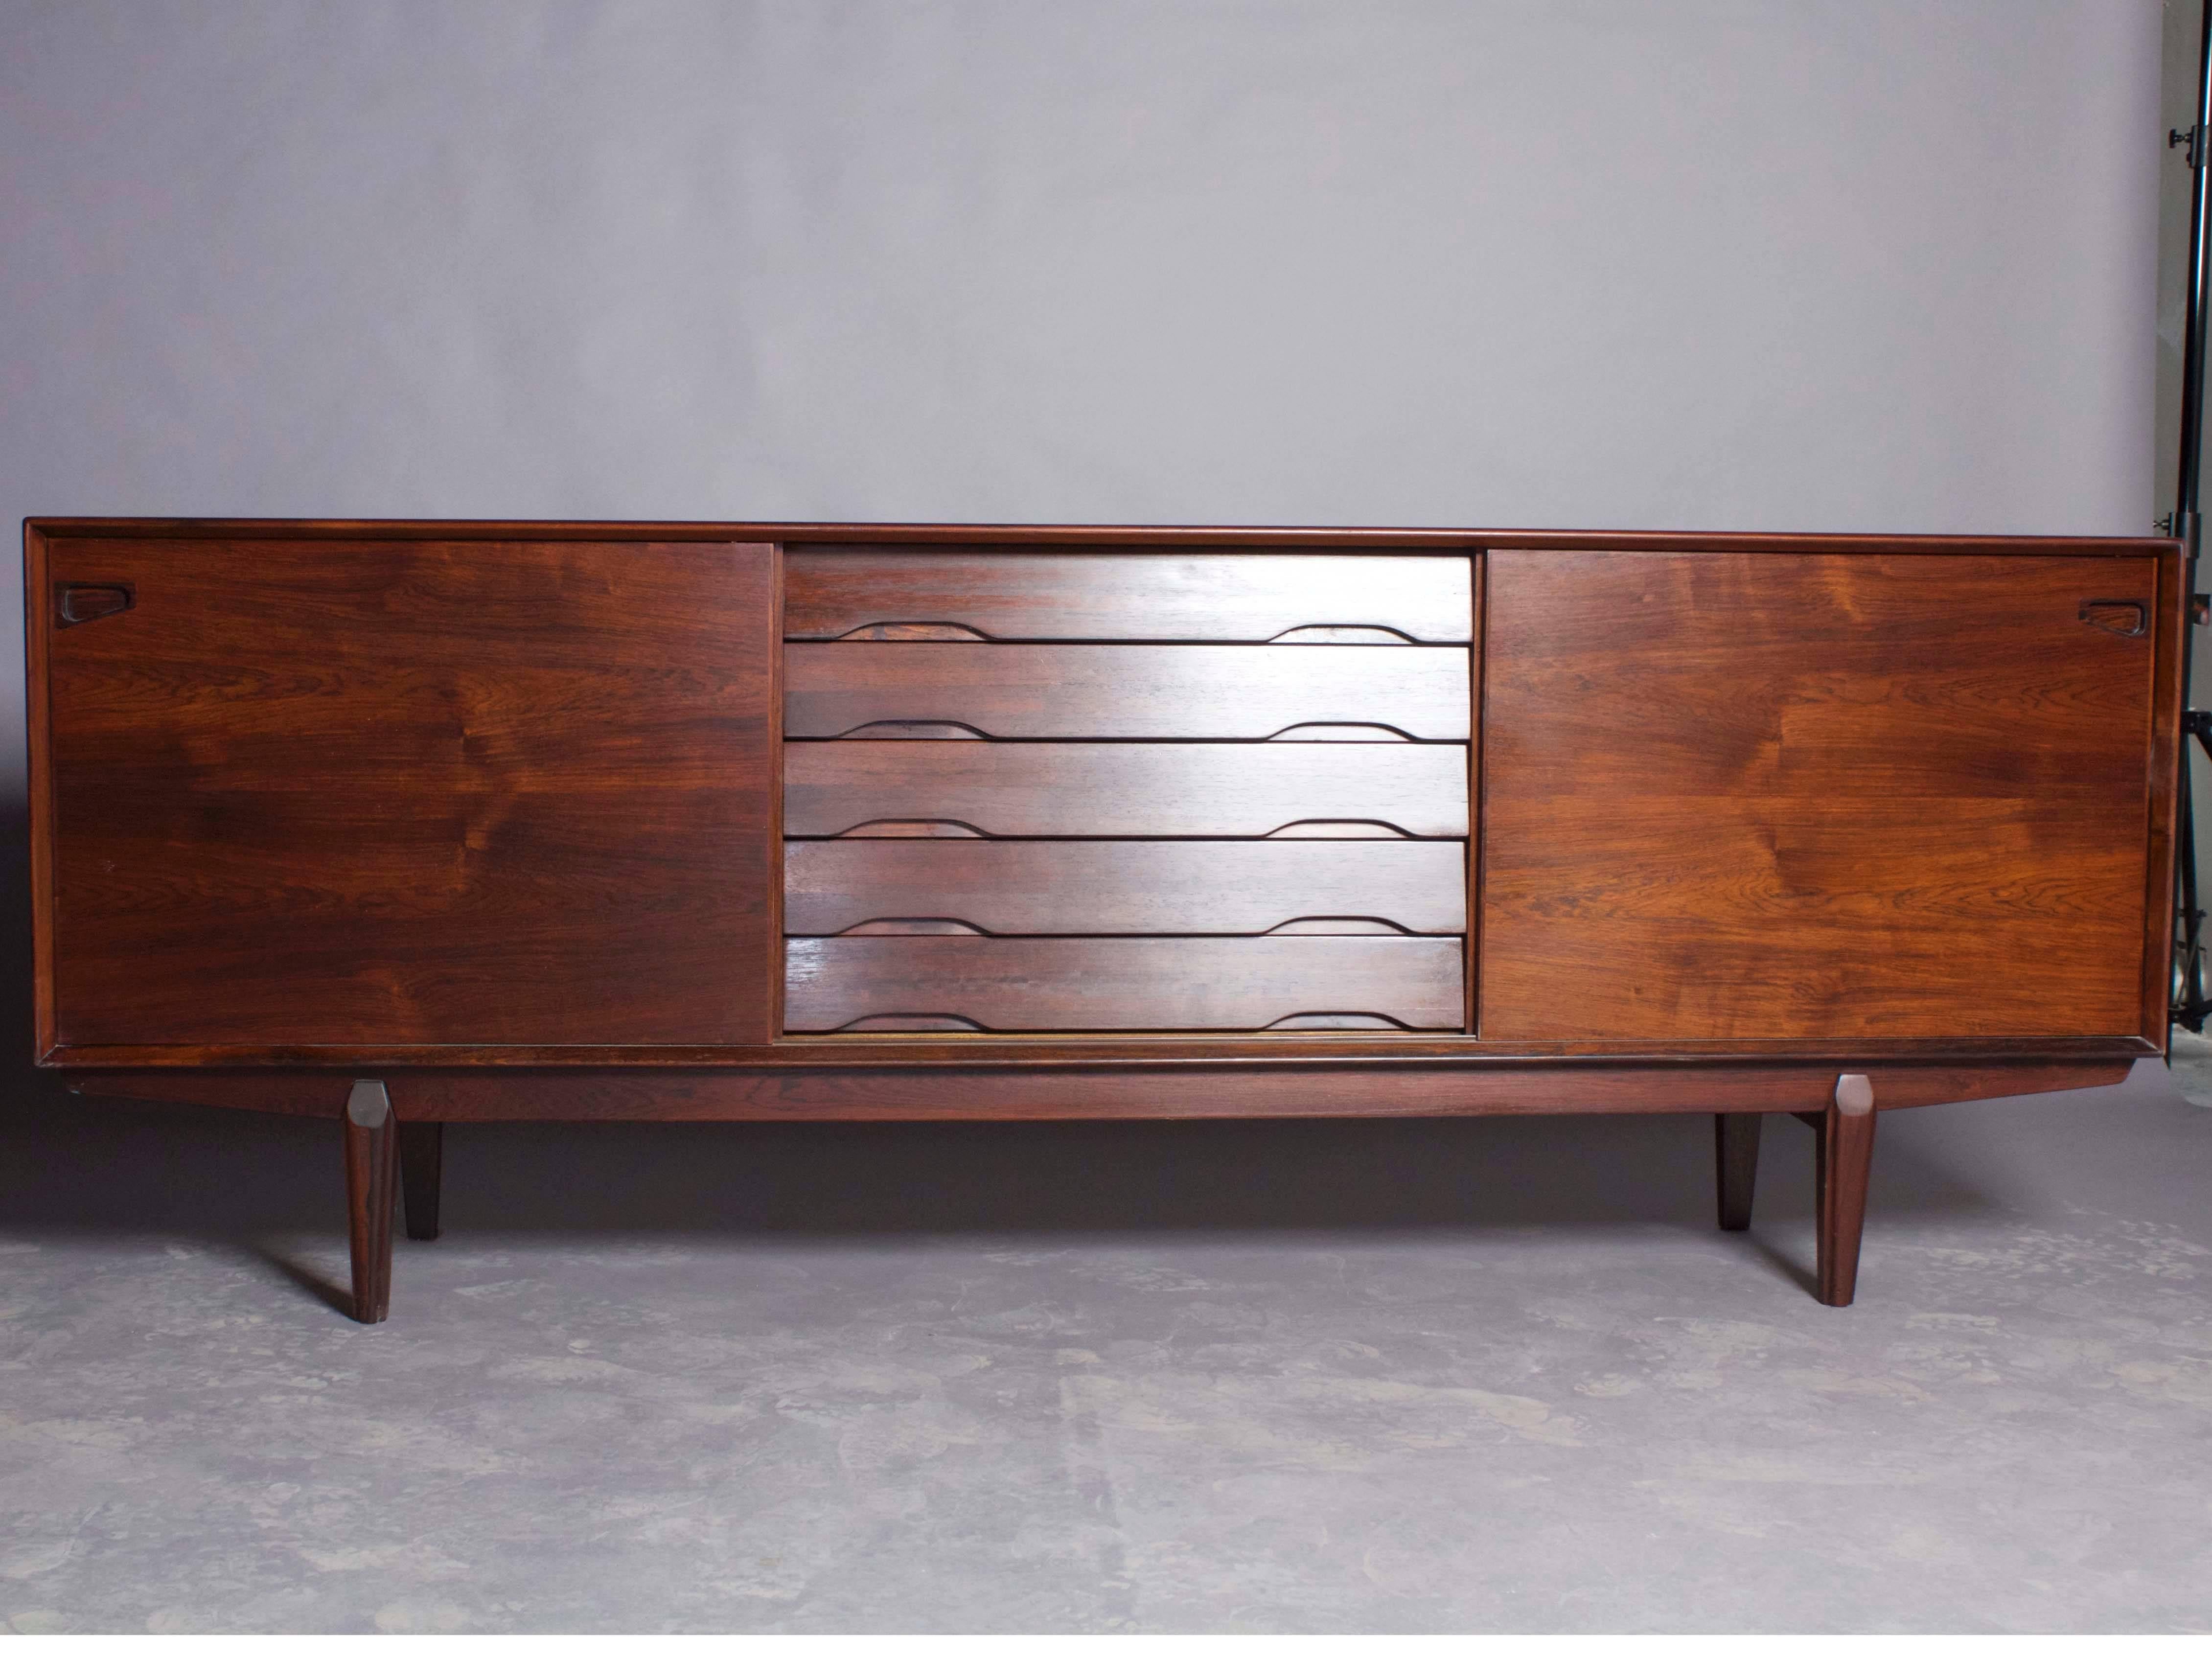 Vintage 1960s Danish credenza in rosewood.

This vintage cabinet is amazing in it's very simple form. This cabinet has the most basic and useful with it's adjustable shelving on either side that is accessible sliding door, and it's middle section